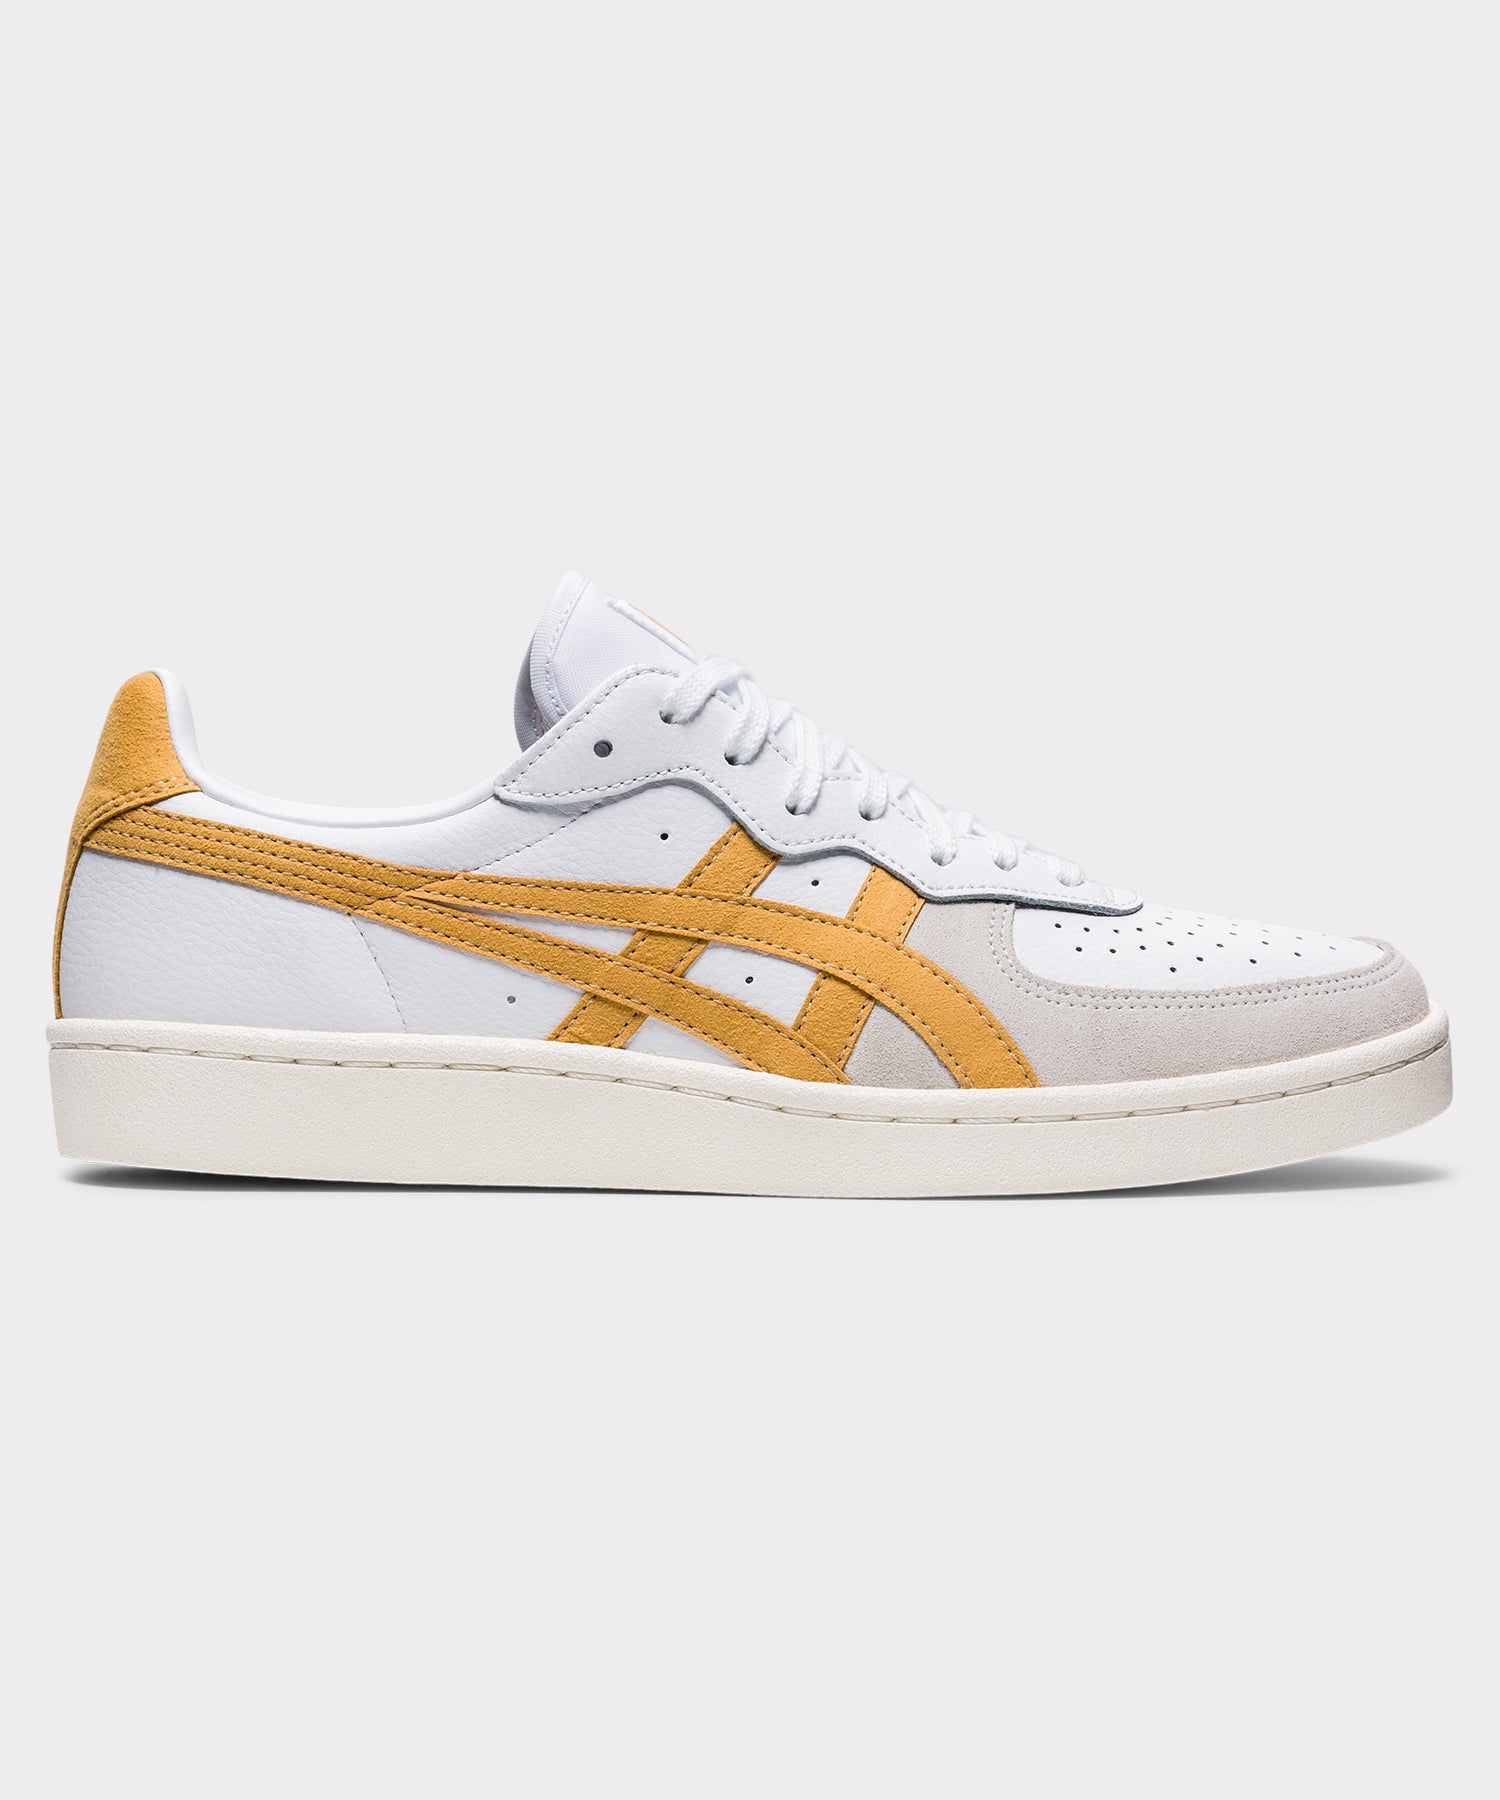 Onitsuka Tiger Gsm In White Yellow Todd Snyder